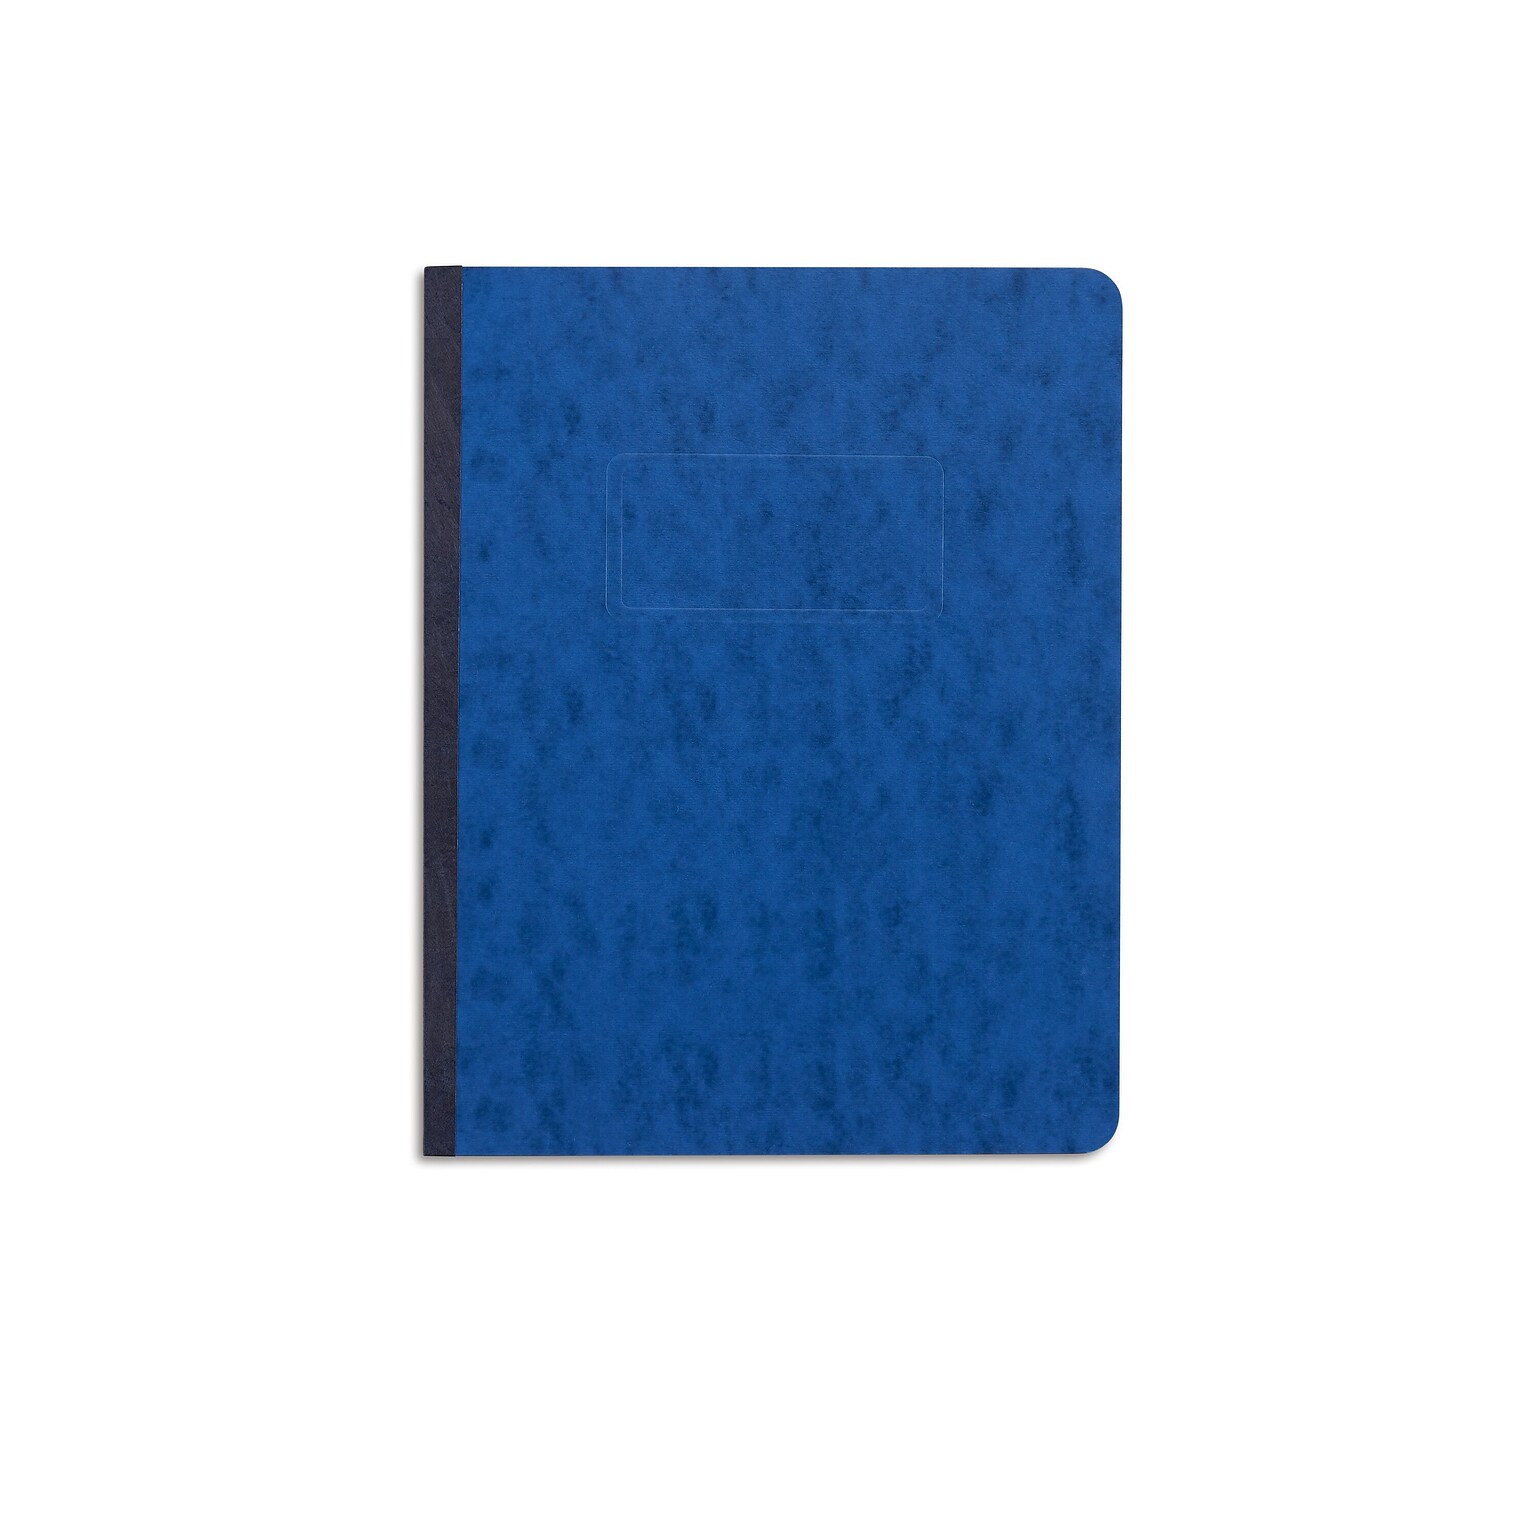 Quill Brand® Prong-Style Pressboard Covers, 8-1/2 x 11, Dark Blue (740402)